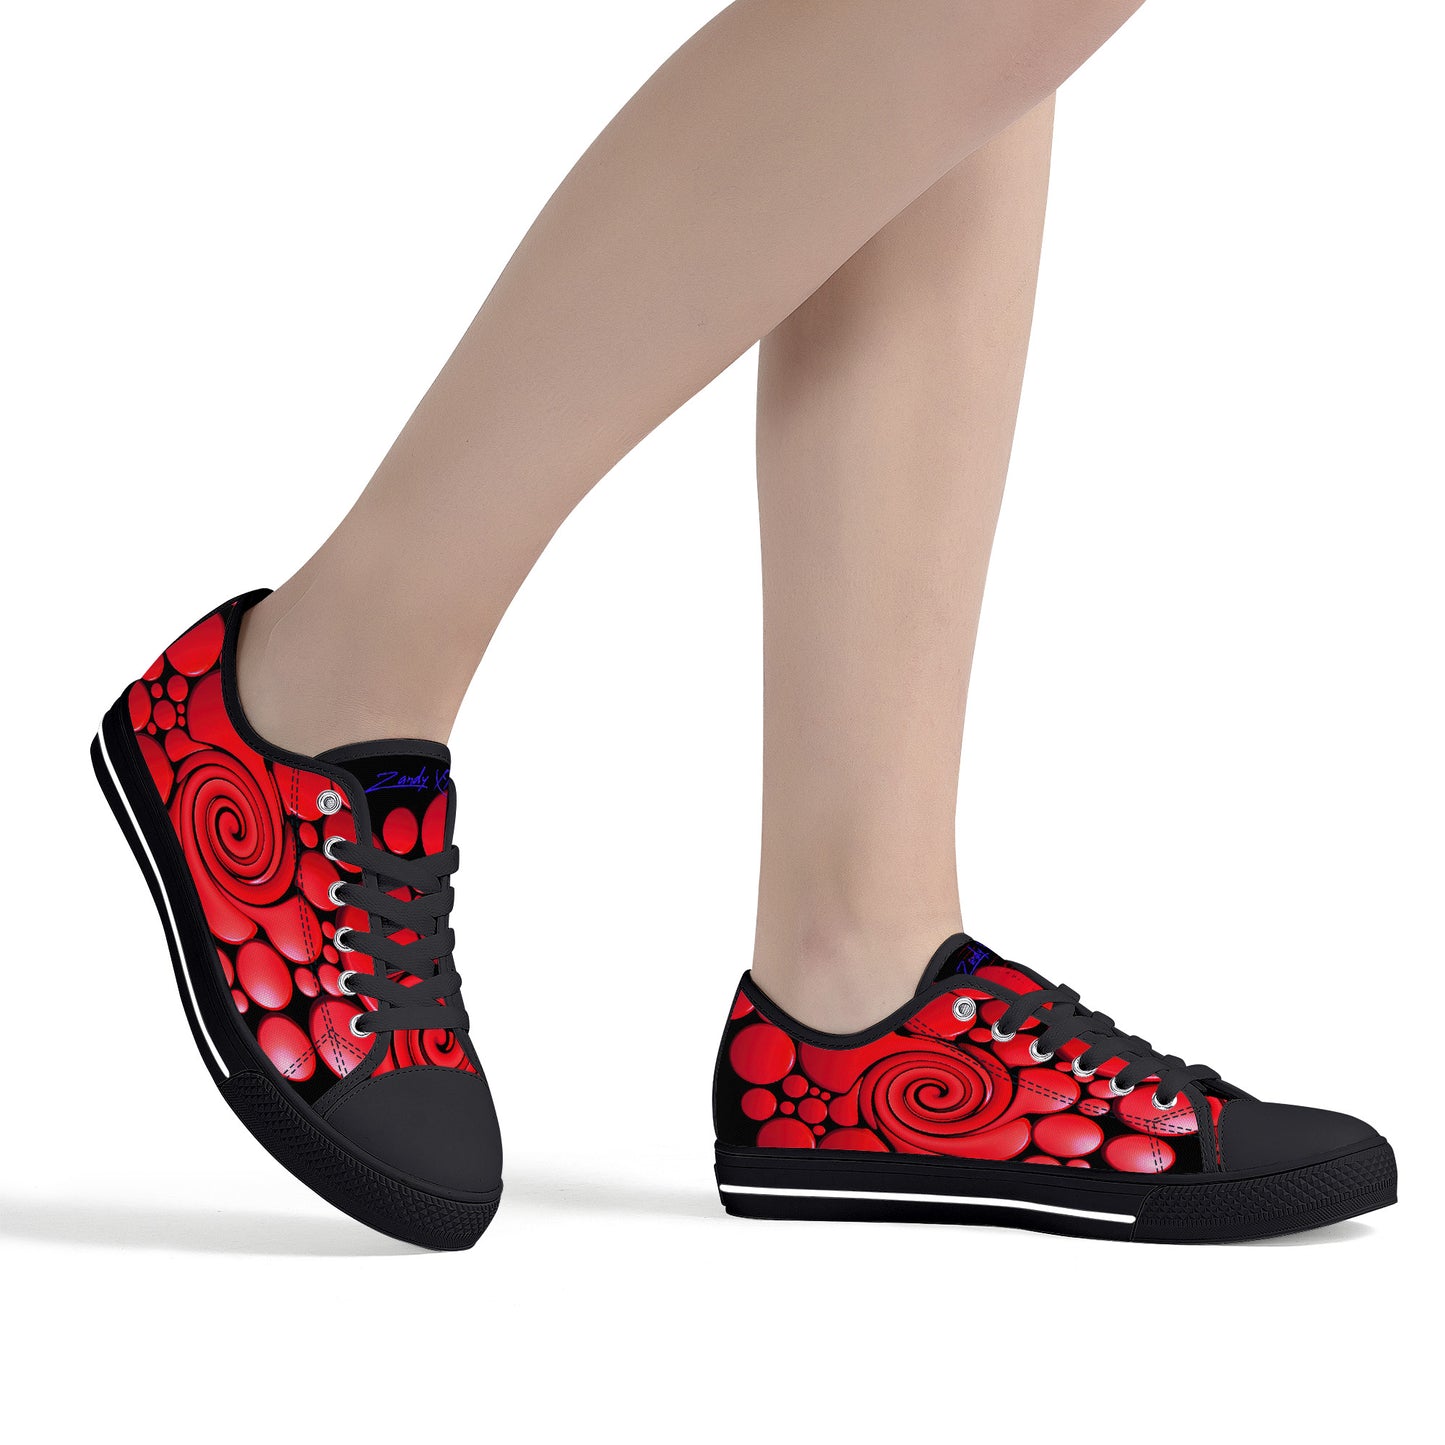 Red Twisted Ellipses Low-Top Canvas Shoes - Black